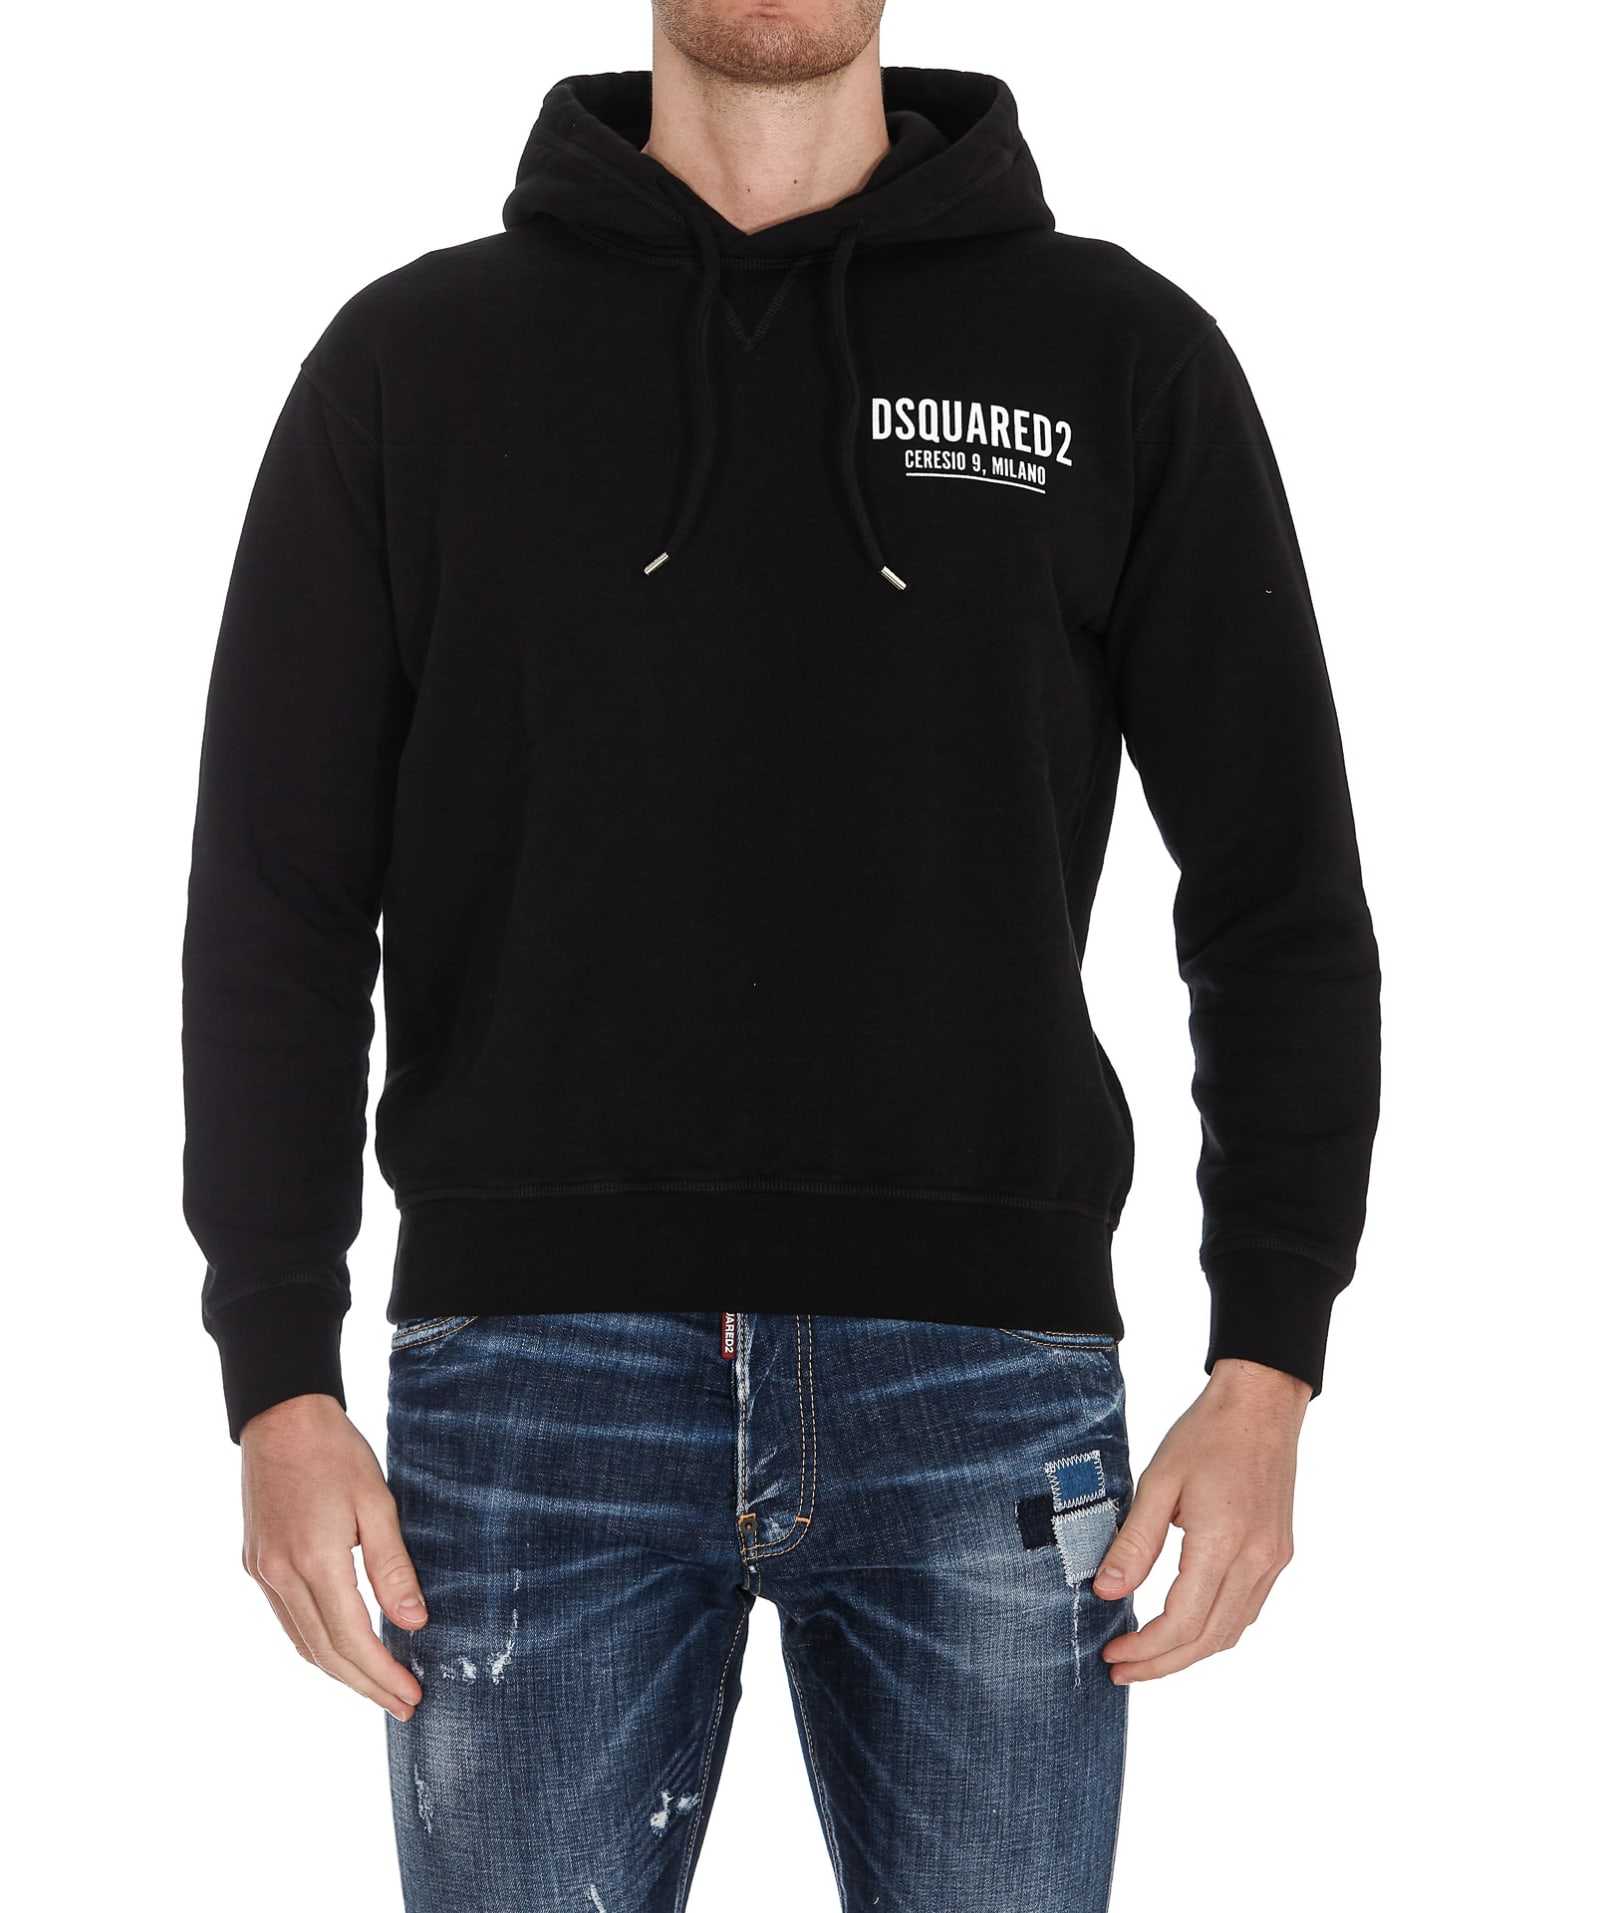 Dsquared2 Dsquared2 Milano Hoodie